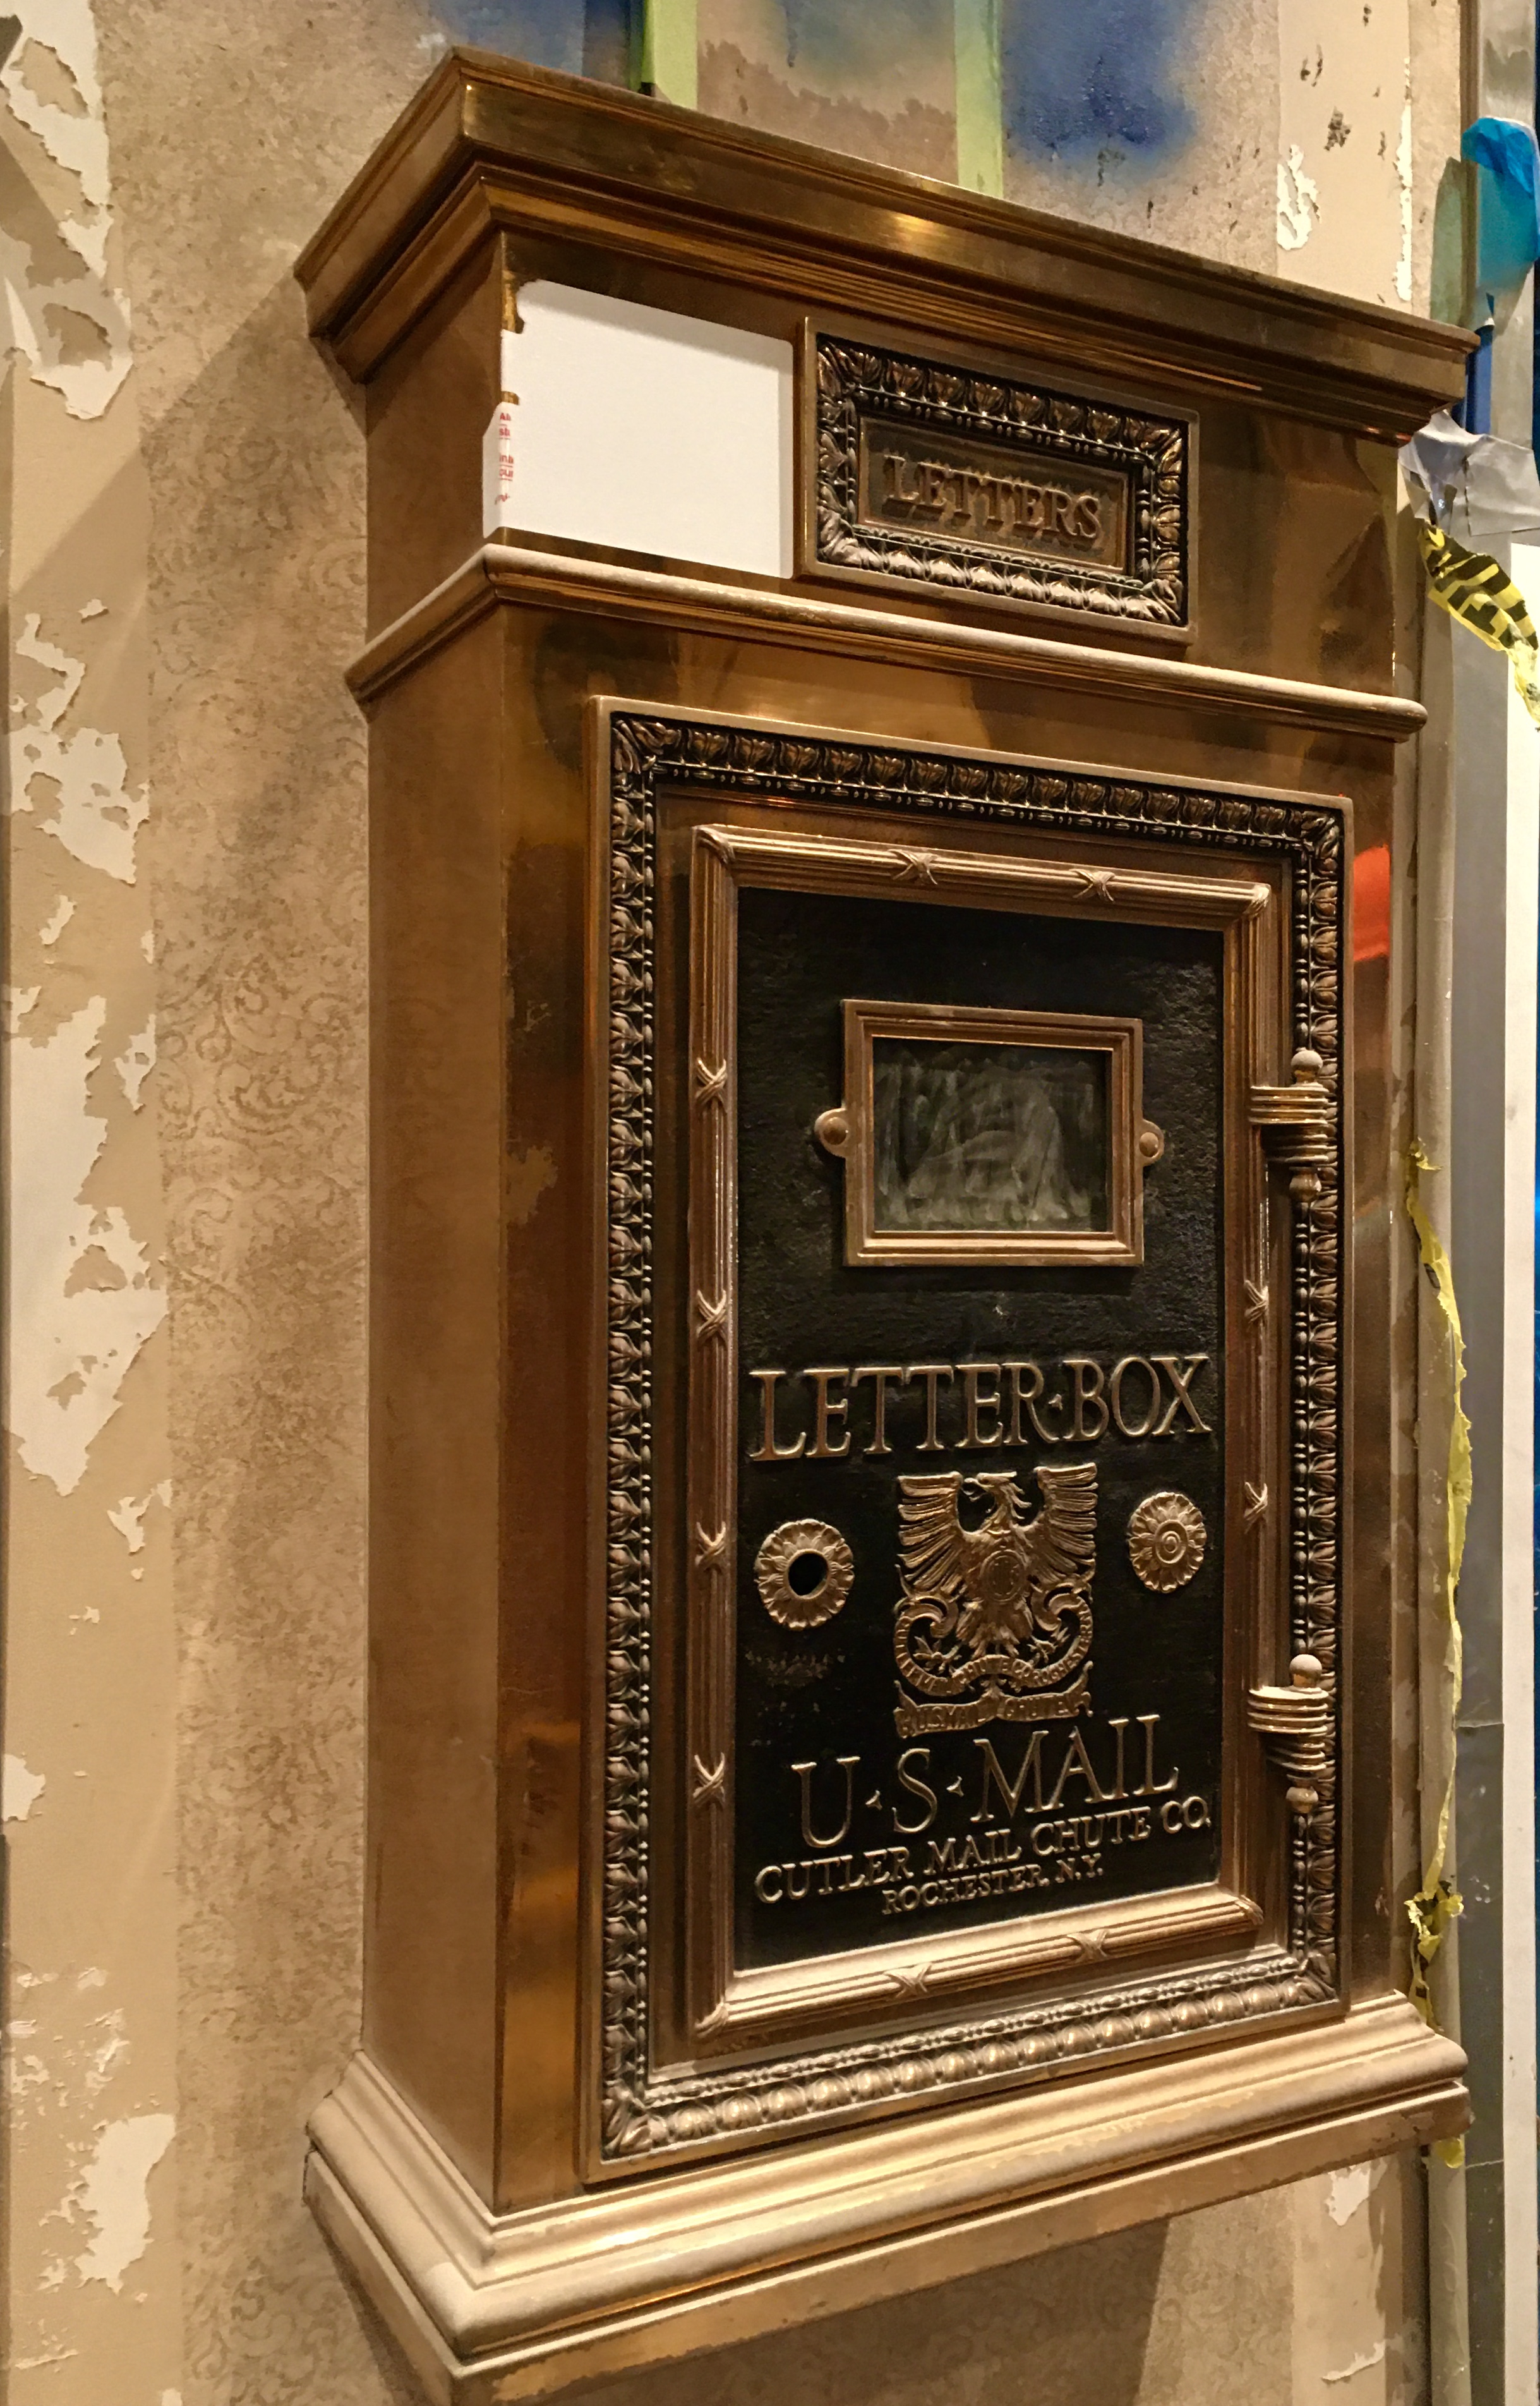 Workers have restored a mailbox in The Watermark at Brooklyn Heights’ lobby. Eagle photo by Lore Croghan